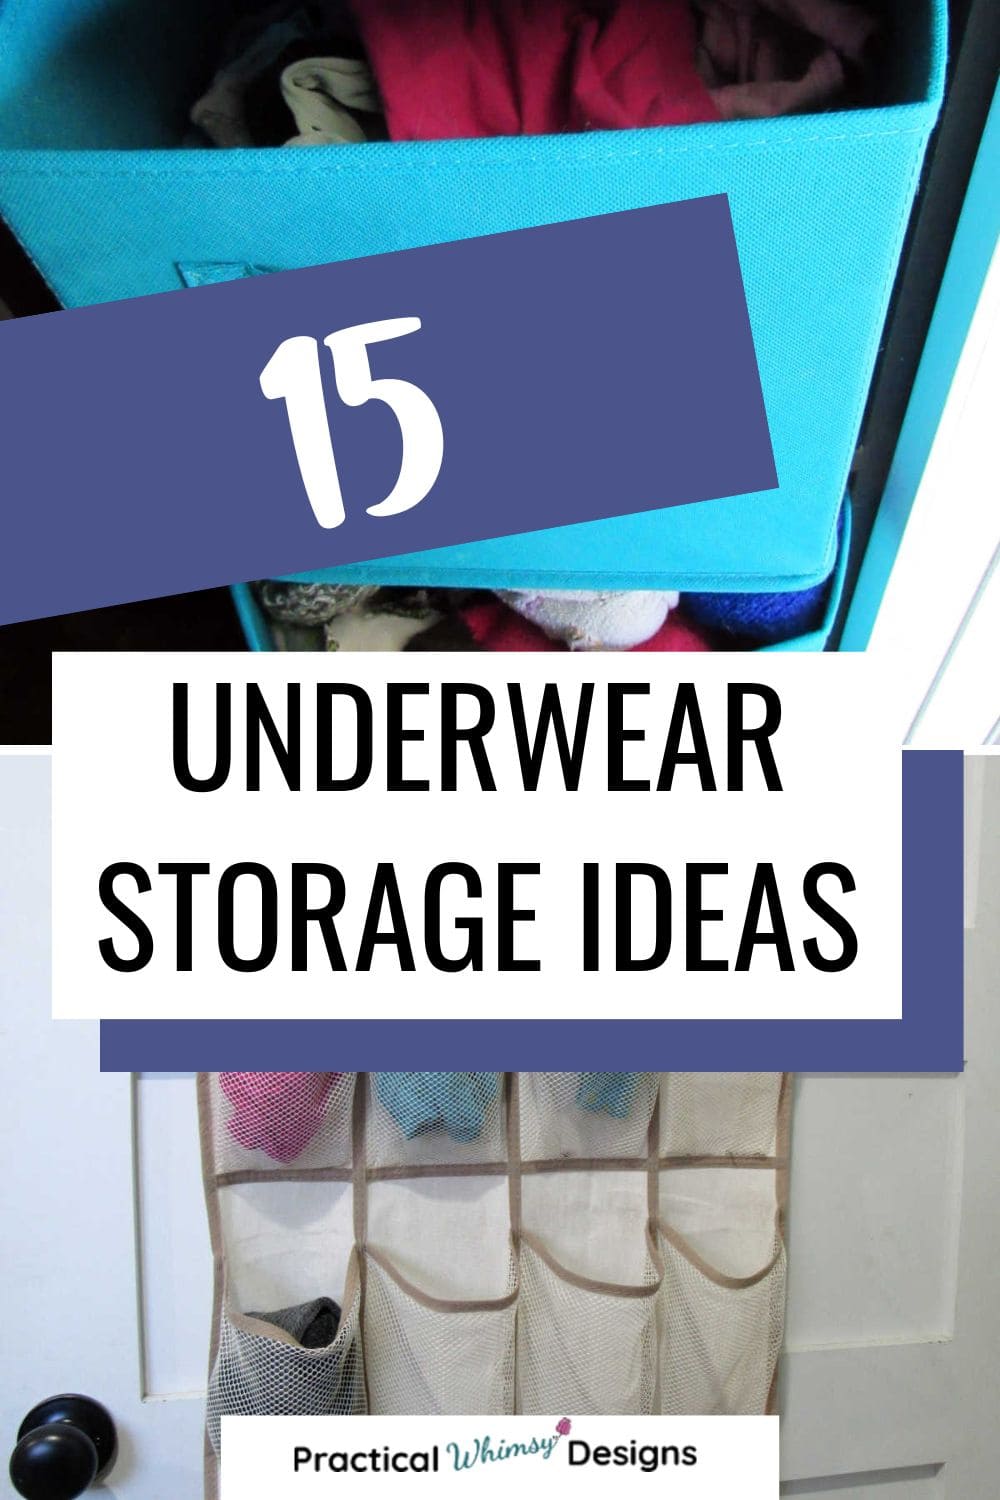 How to Organize Underwear in a Closet: 15 Easy Ideas - Practical Whimsy ...